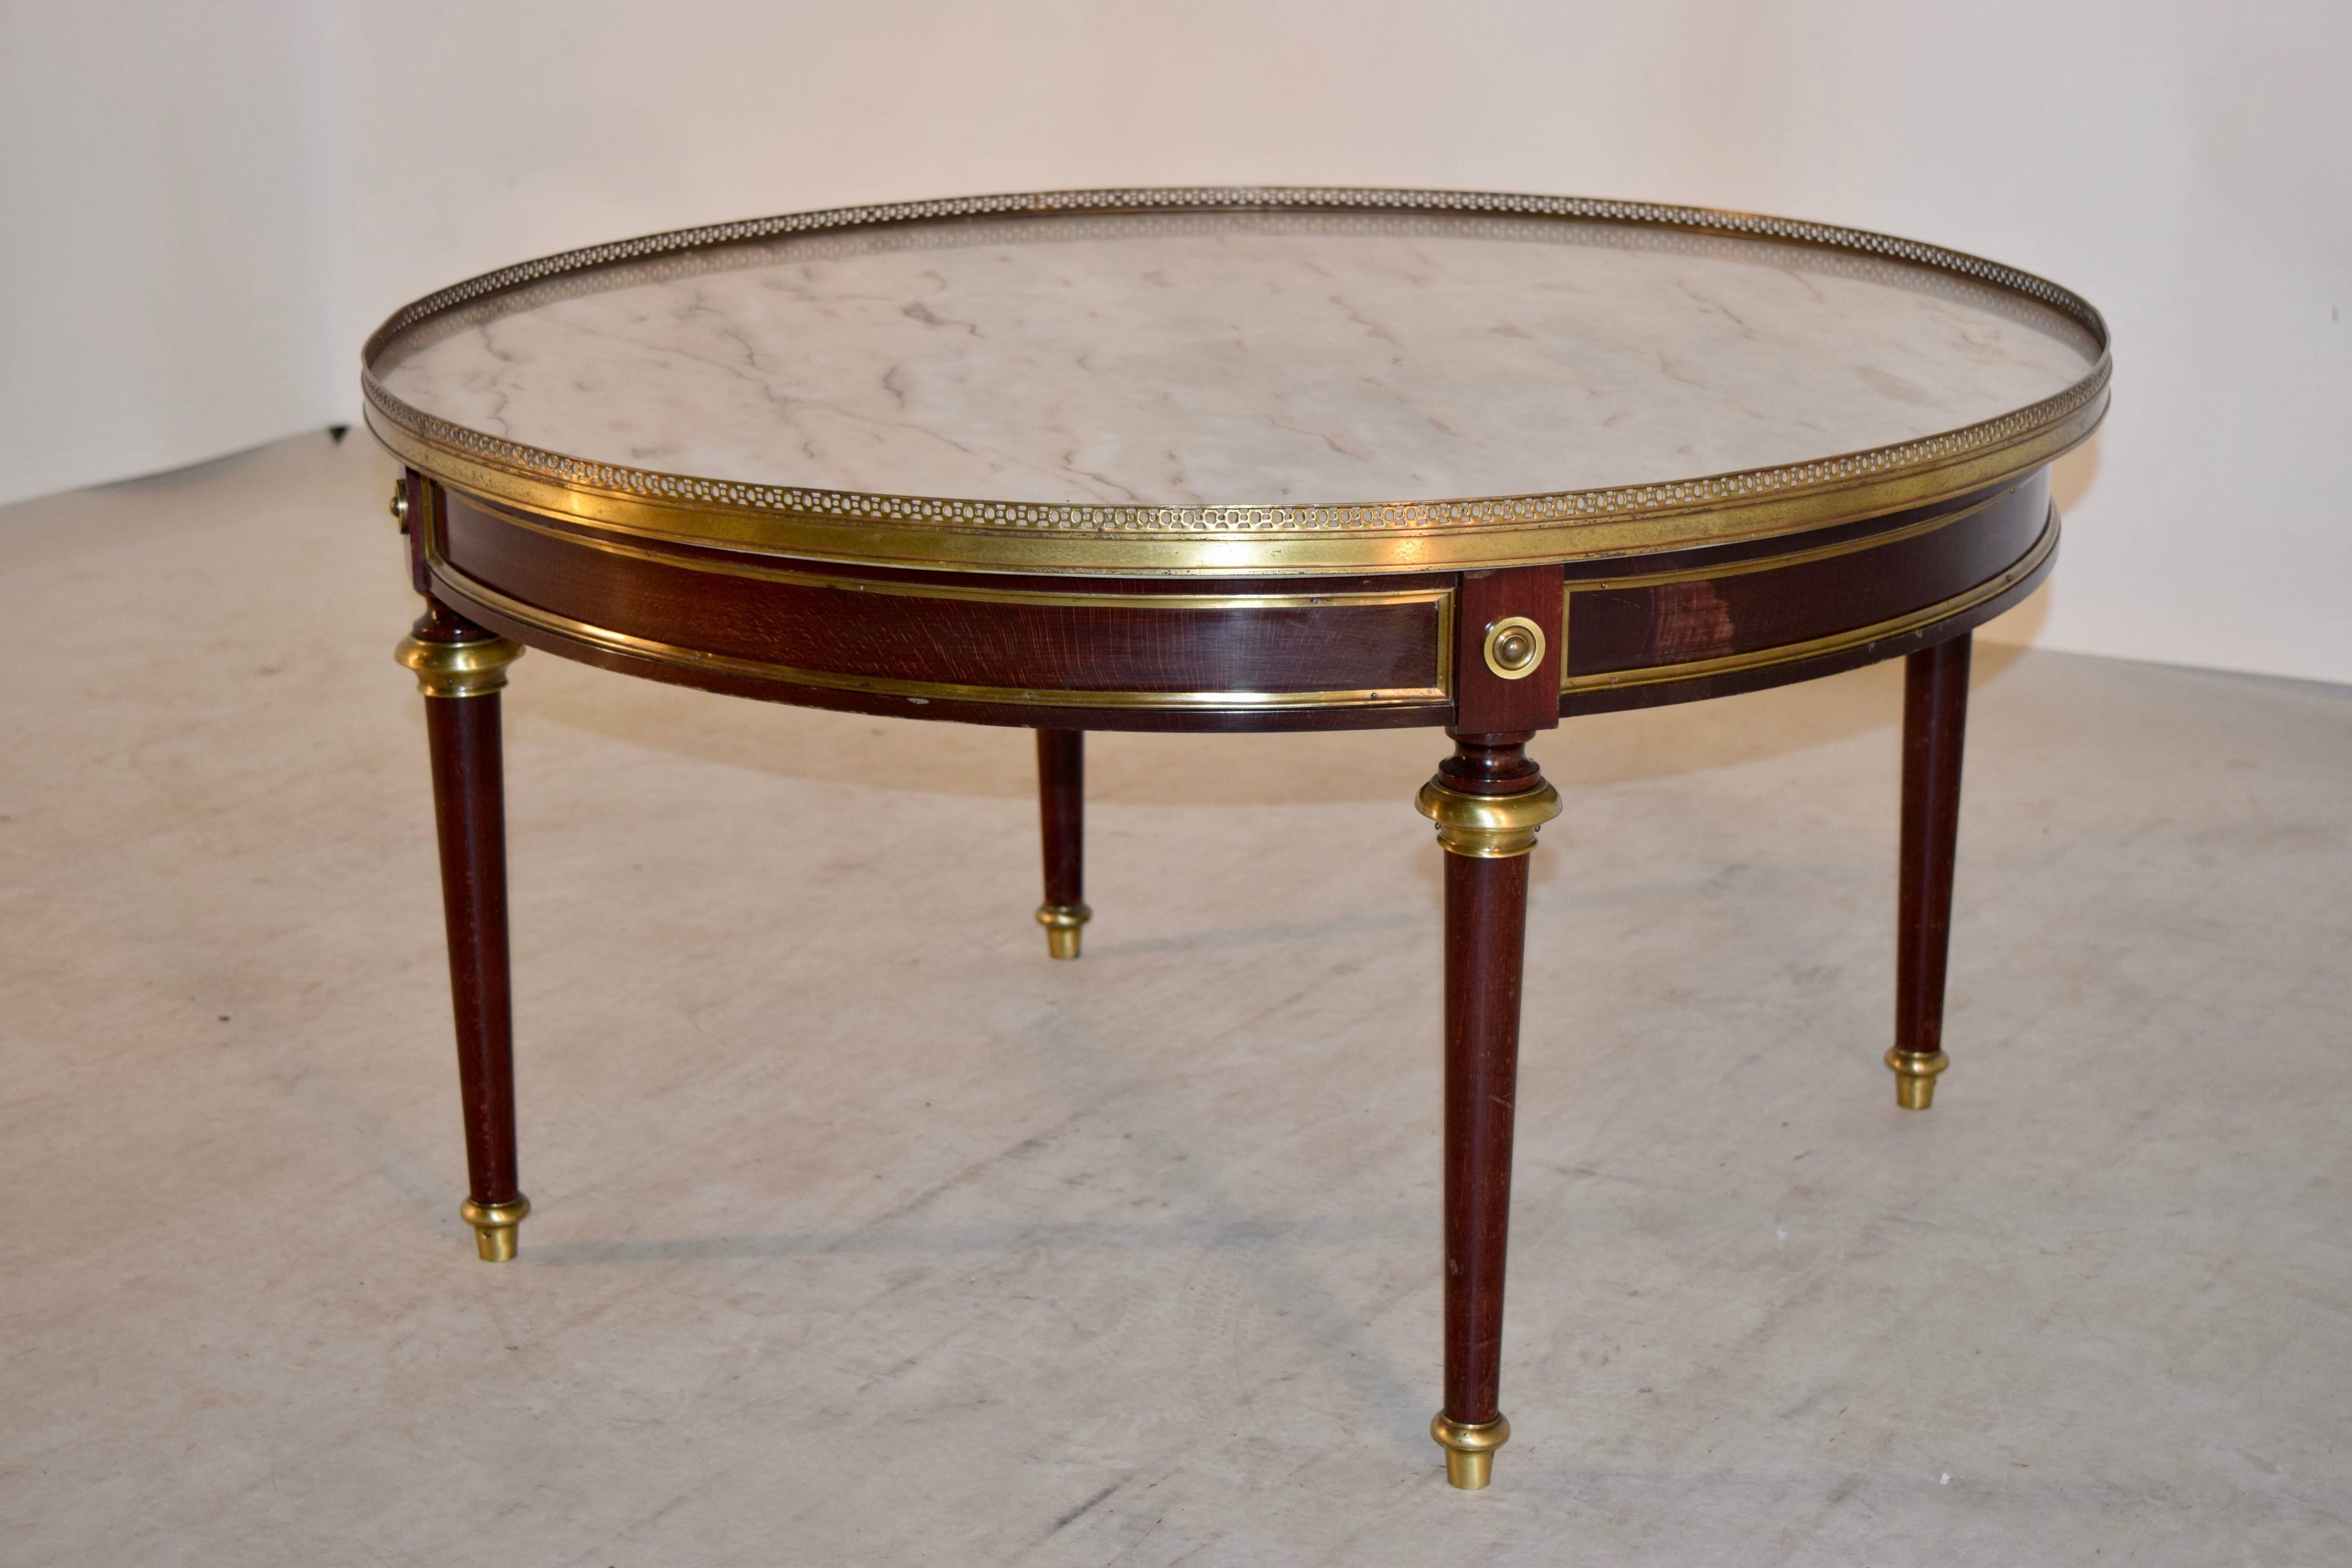 Regency style coffee table from England, circa 1920s. The top is marble, and is surrounded by a pierced brass gallery, following down to a round base made from Mahogany with brass molded decoration. The legs are shaped and end in brass caps.